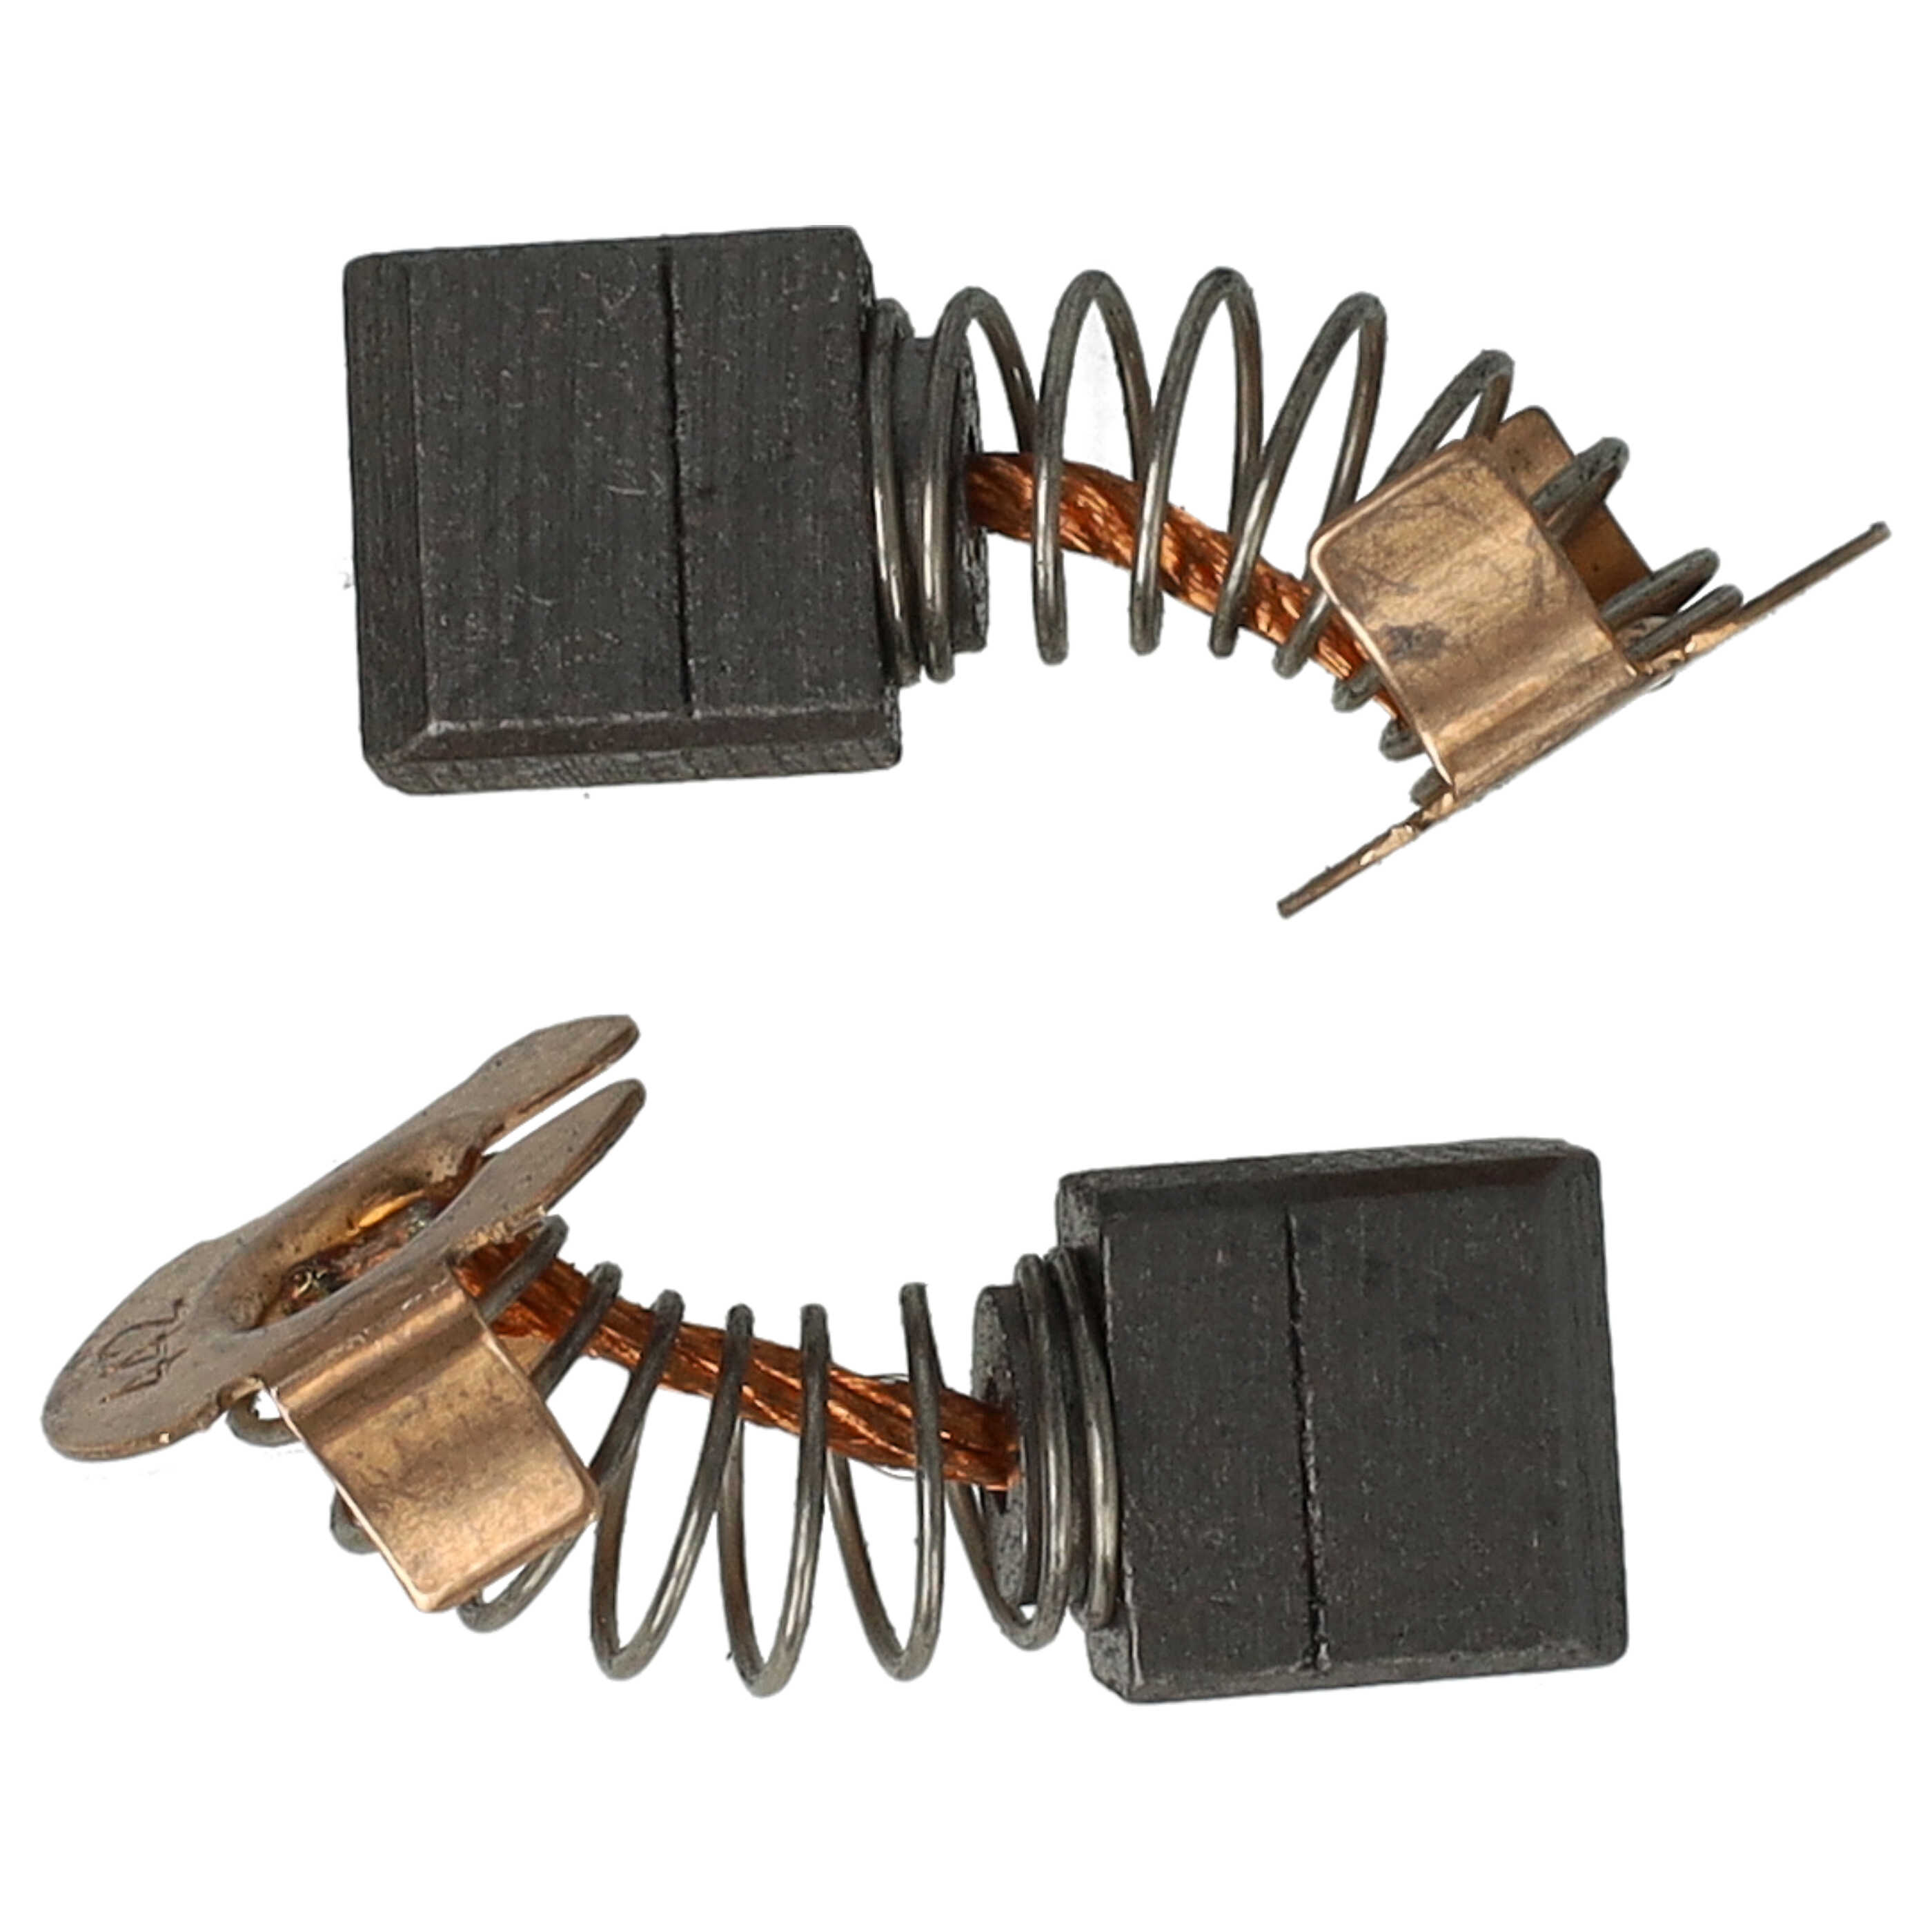 2x Carbon Brush as Replacement for Hitachi / Hikoki 999017 Electric Power Tools + Spring, 11 x 11 x 7mm